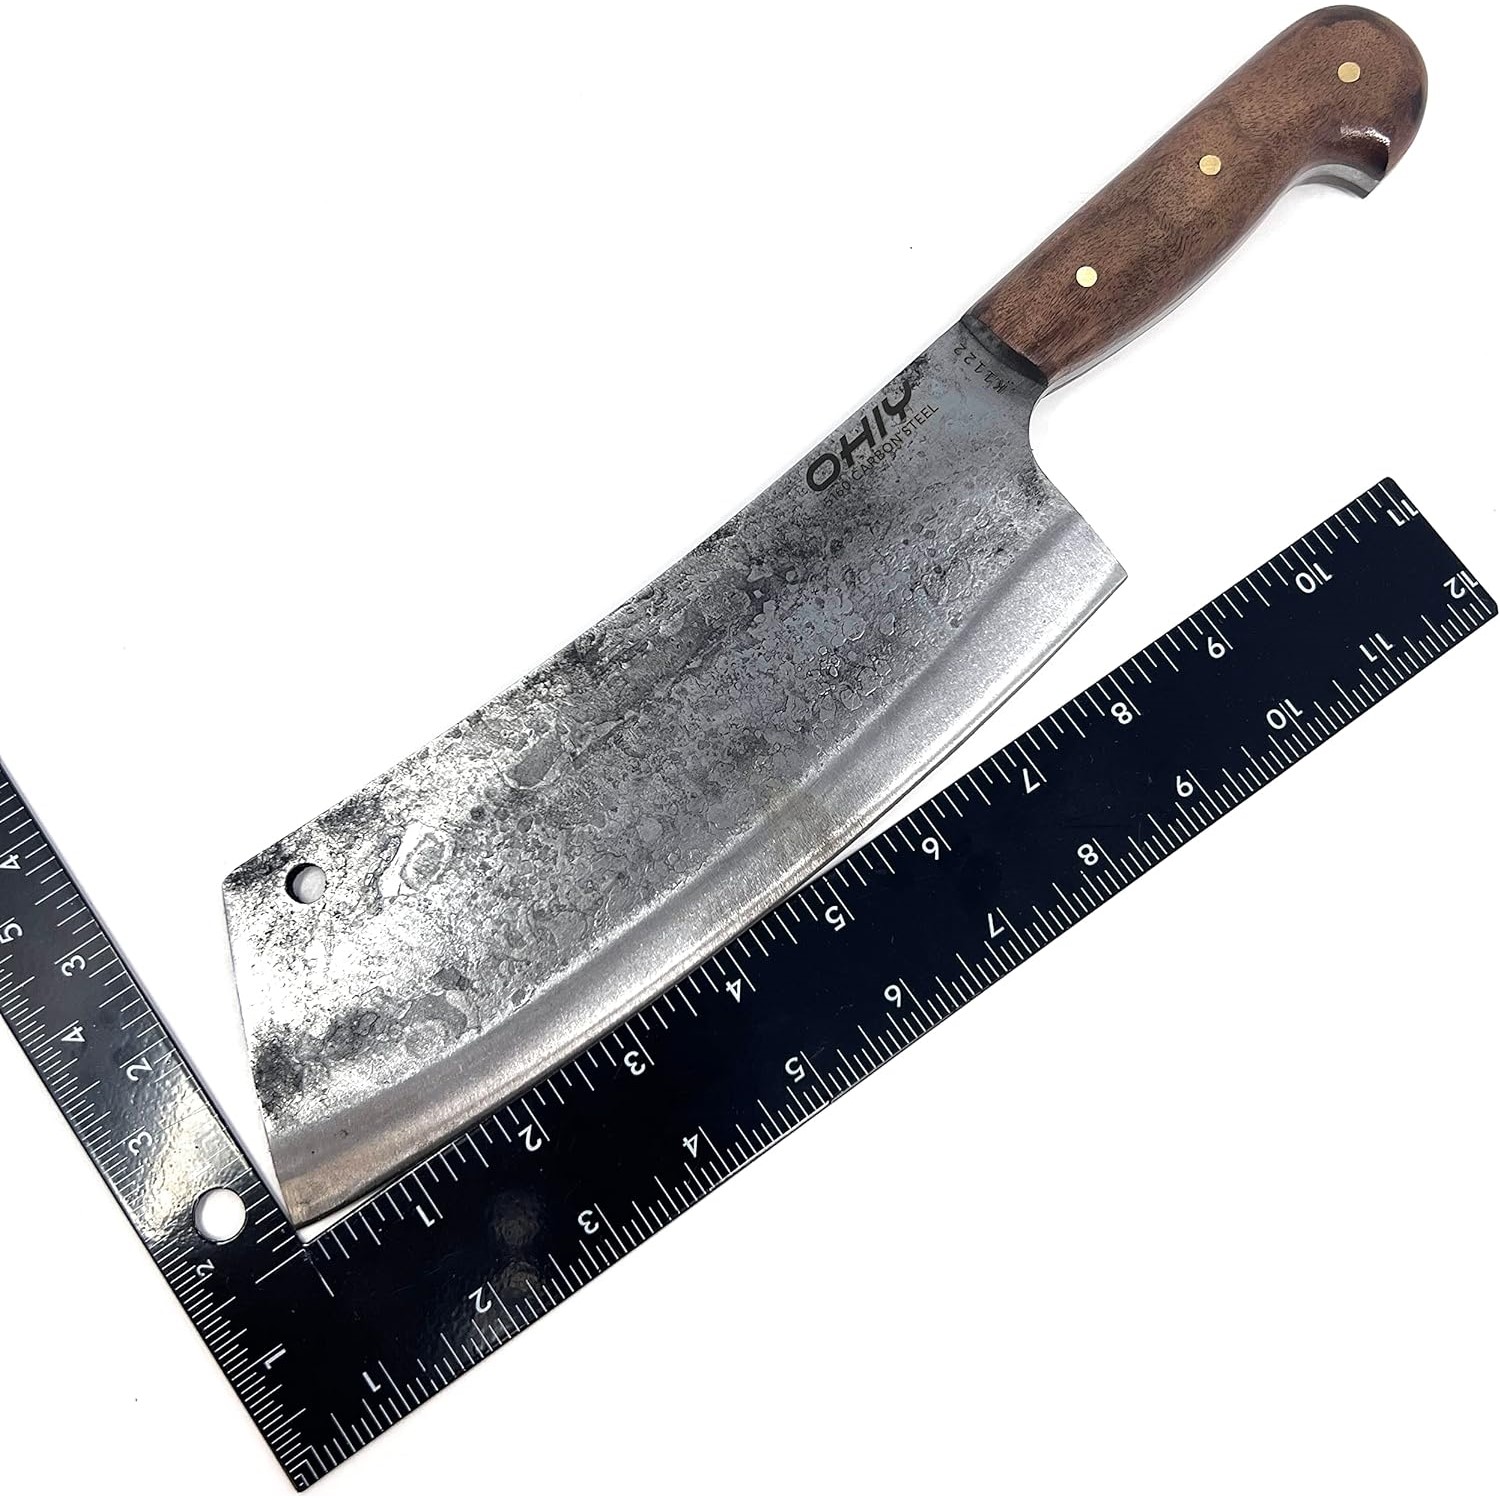 2 x 6-inch Meat Cleaver Knife Stainless Steel Professional Butcher